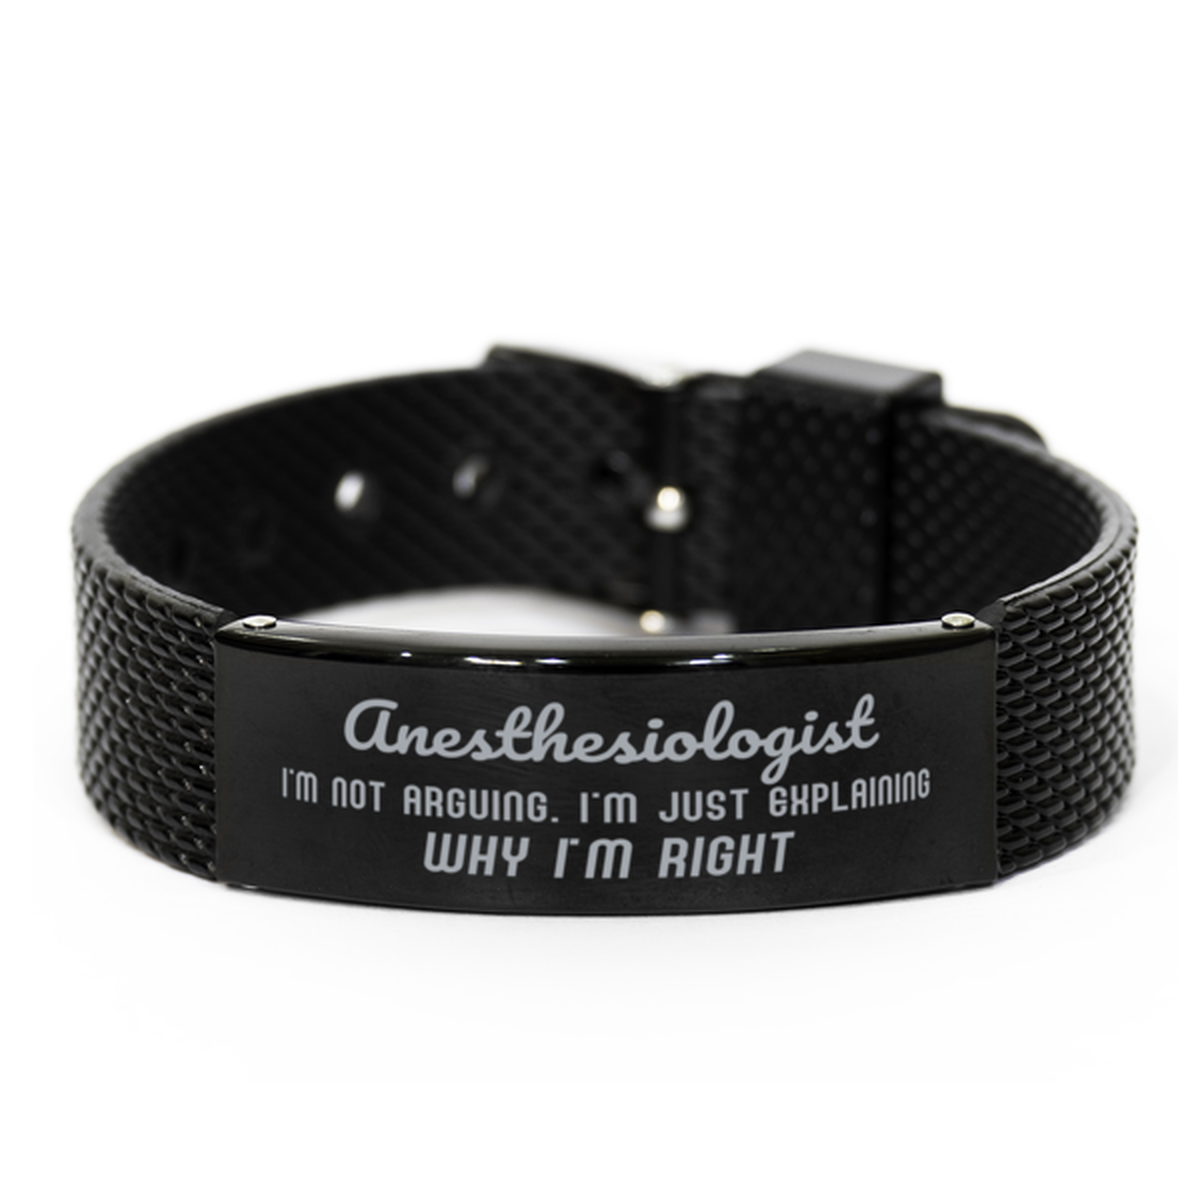 Anesthesiologist I'm not Arguing. I'm Just Explaining Why I'm RIGHT Black Shark Mesh Bracelet, Funny Saying Quote Anesthesiologist Gifts For Anesthesiologist Graduation Birthday Christmas Gifts for Men Women Coworker